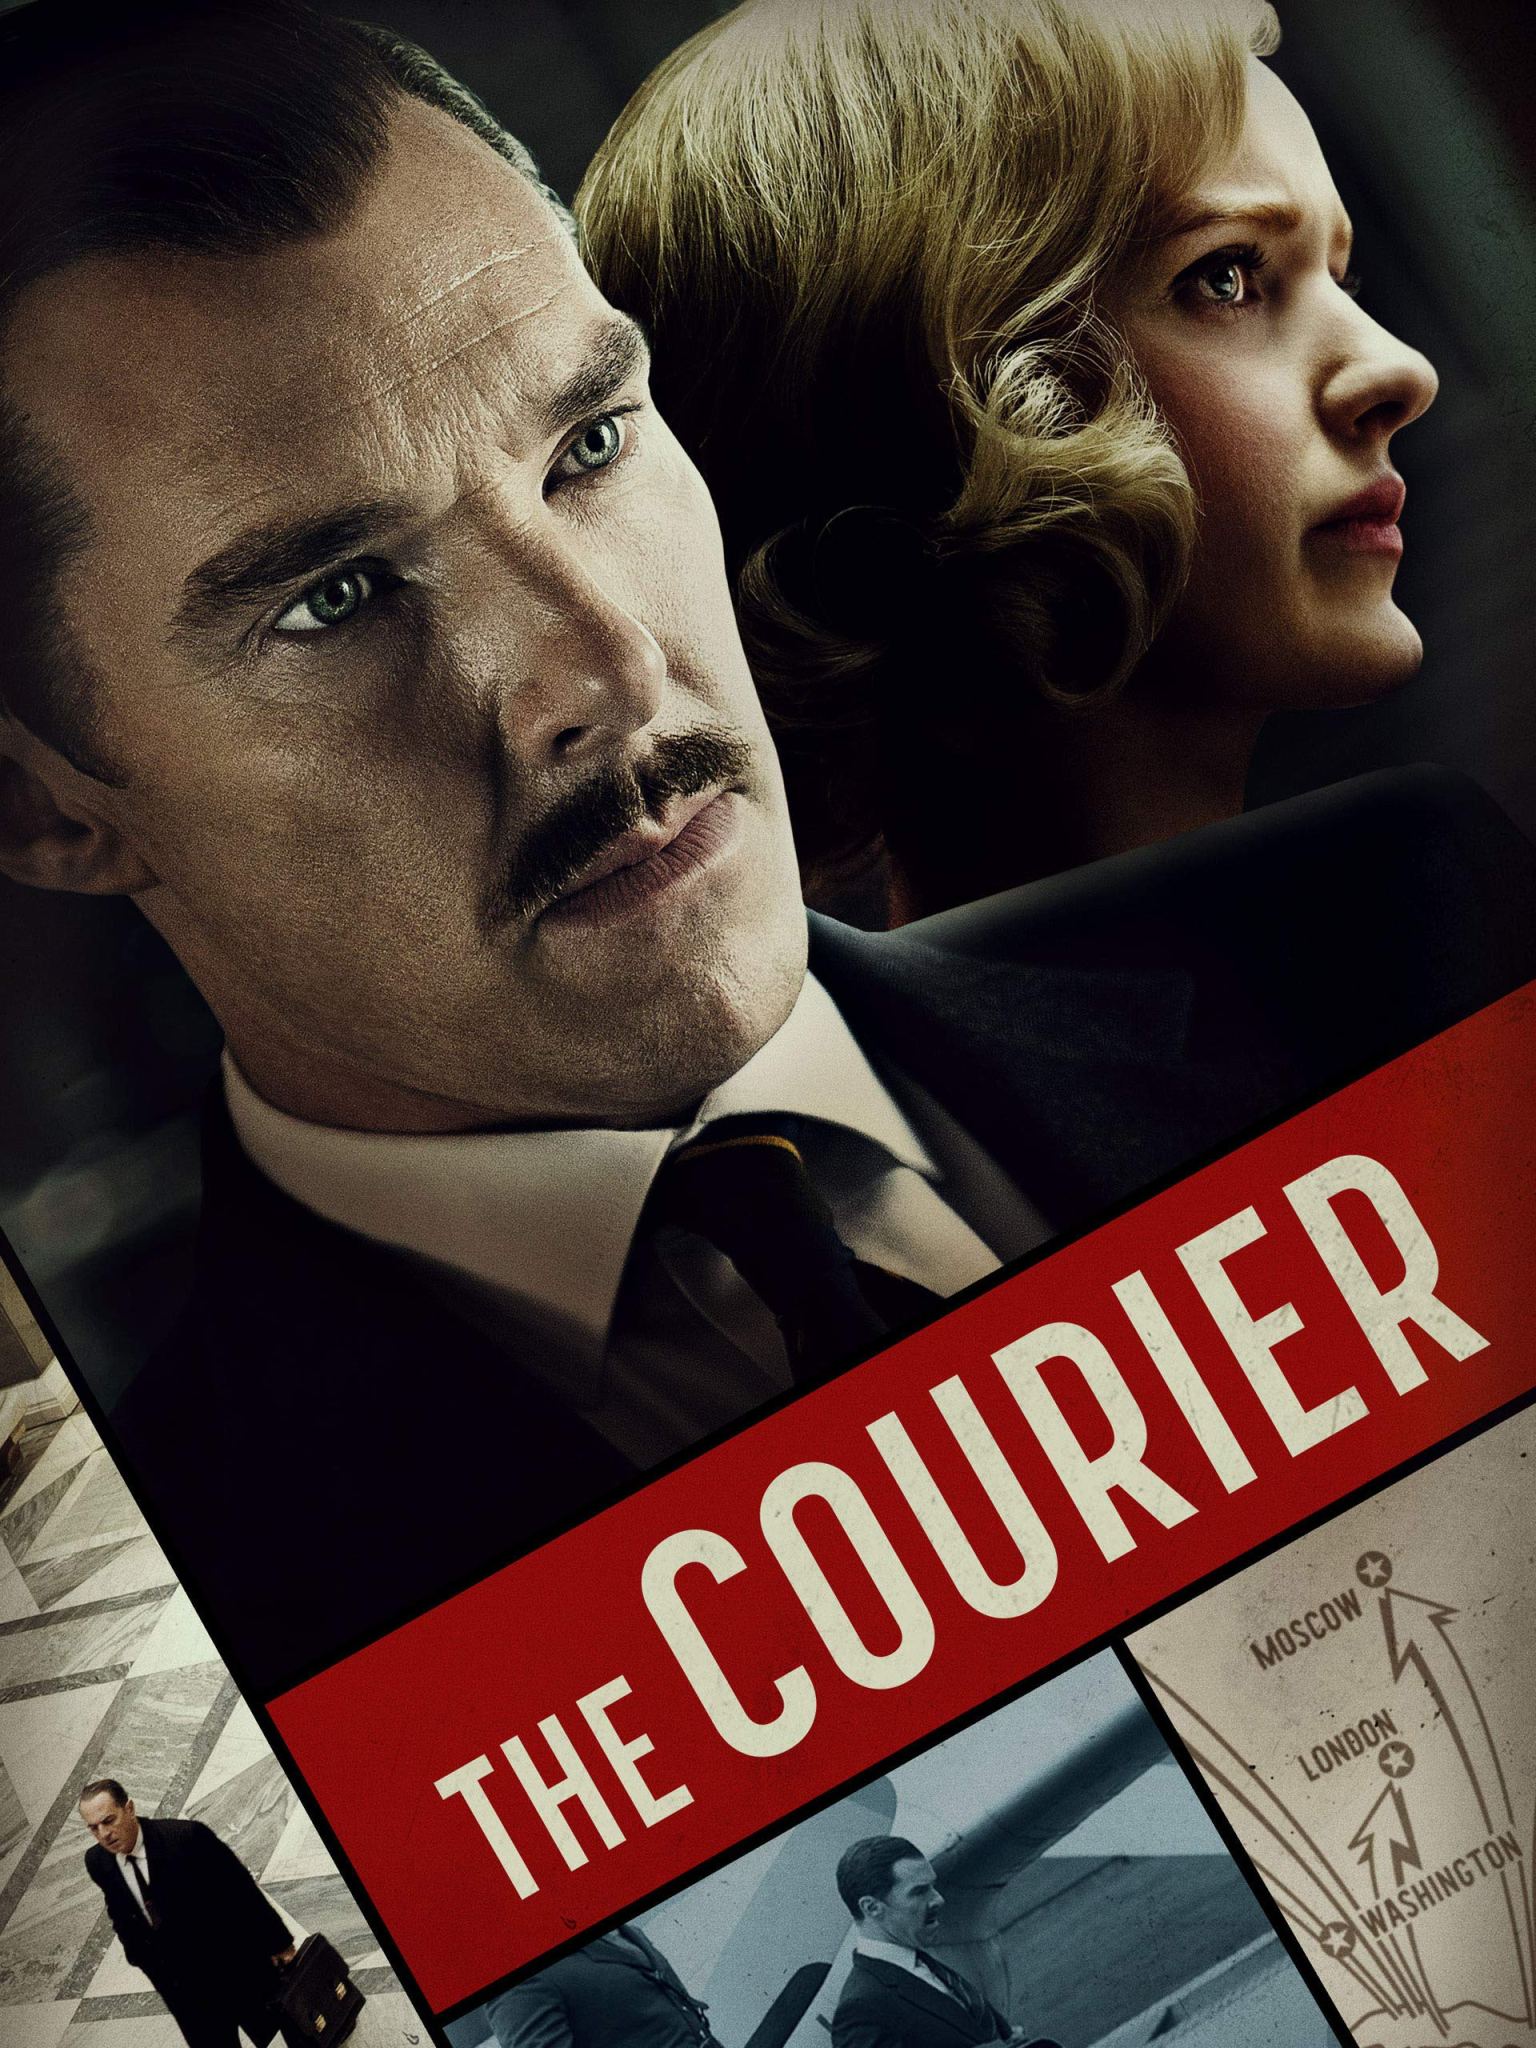 THE COURIER (2020) – Benedict Cumberbatch Historical Thriller Delivers